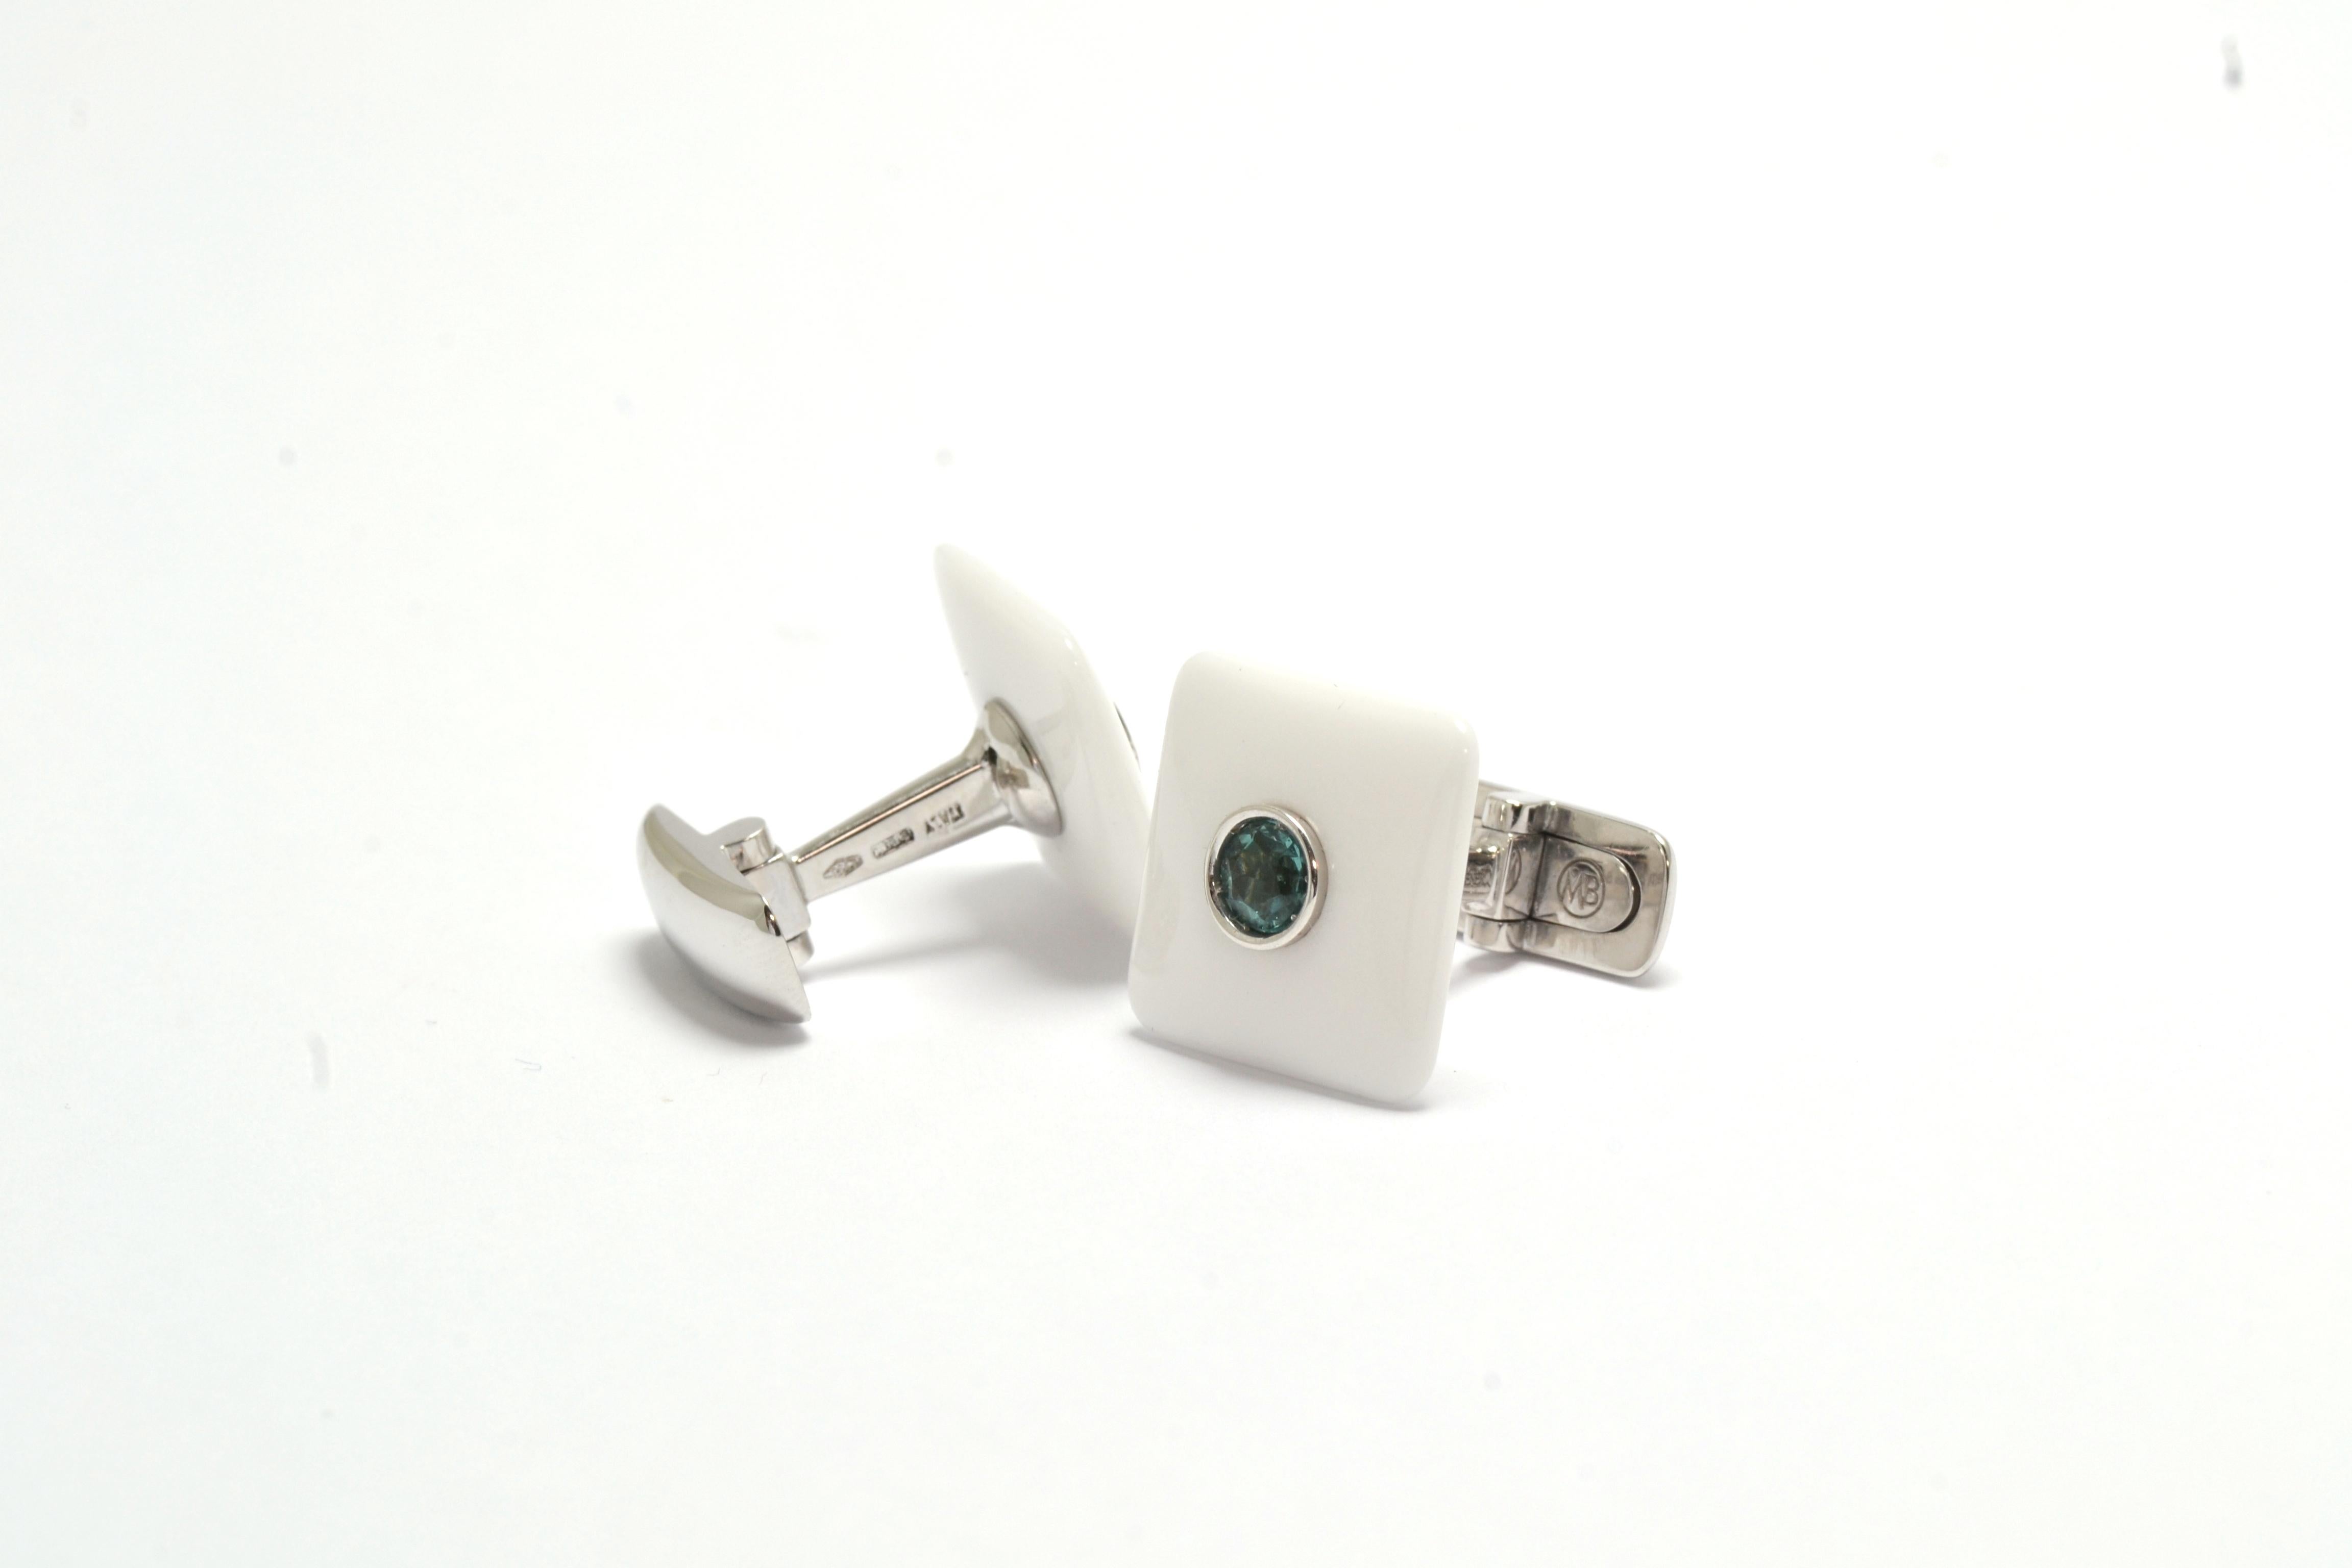 Enchanting, shining, cool and different pair of white agate handmade cufflinks.
Designed, handmade in Italy, signed Margherita Burgener, the squared plaques - 0.55 inches by 0.55 inches - are centering one bluish green tourmalines and one pink